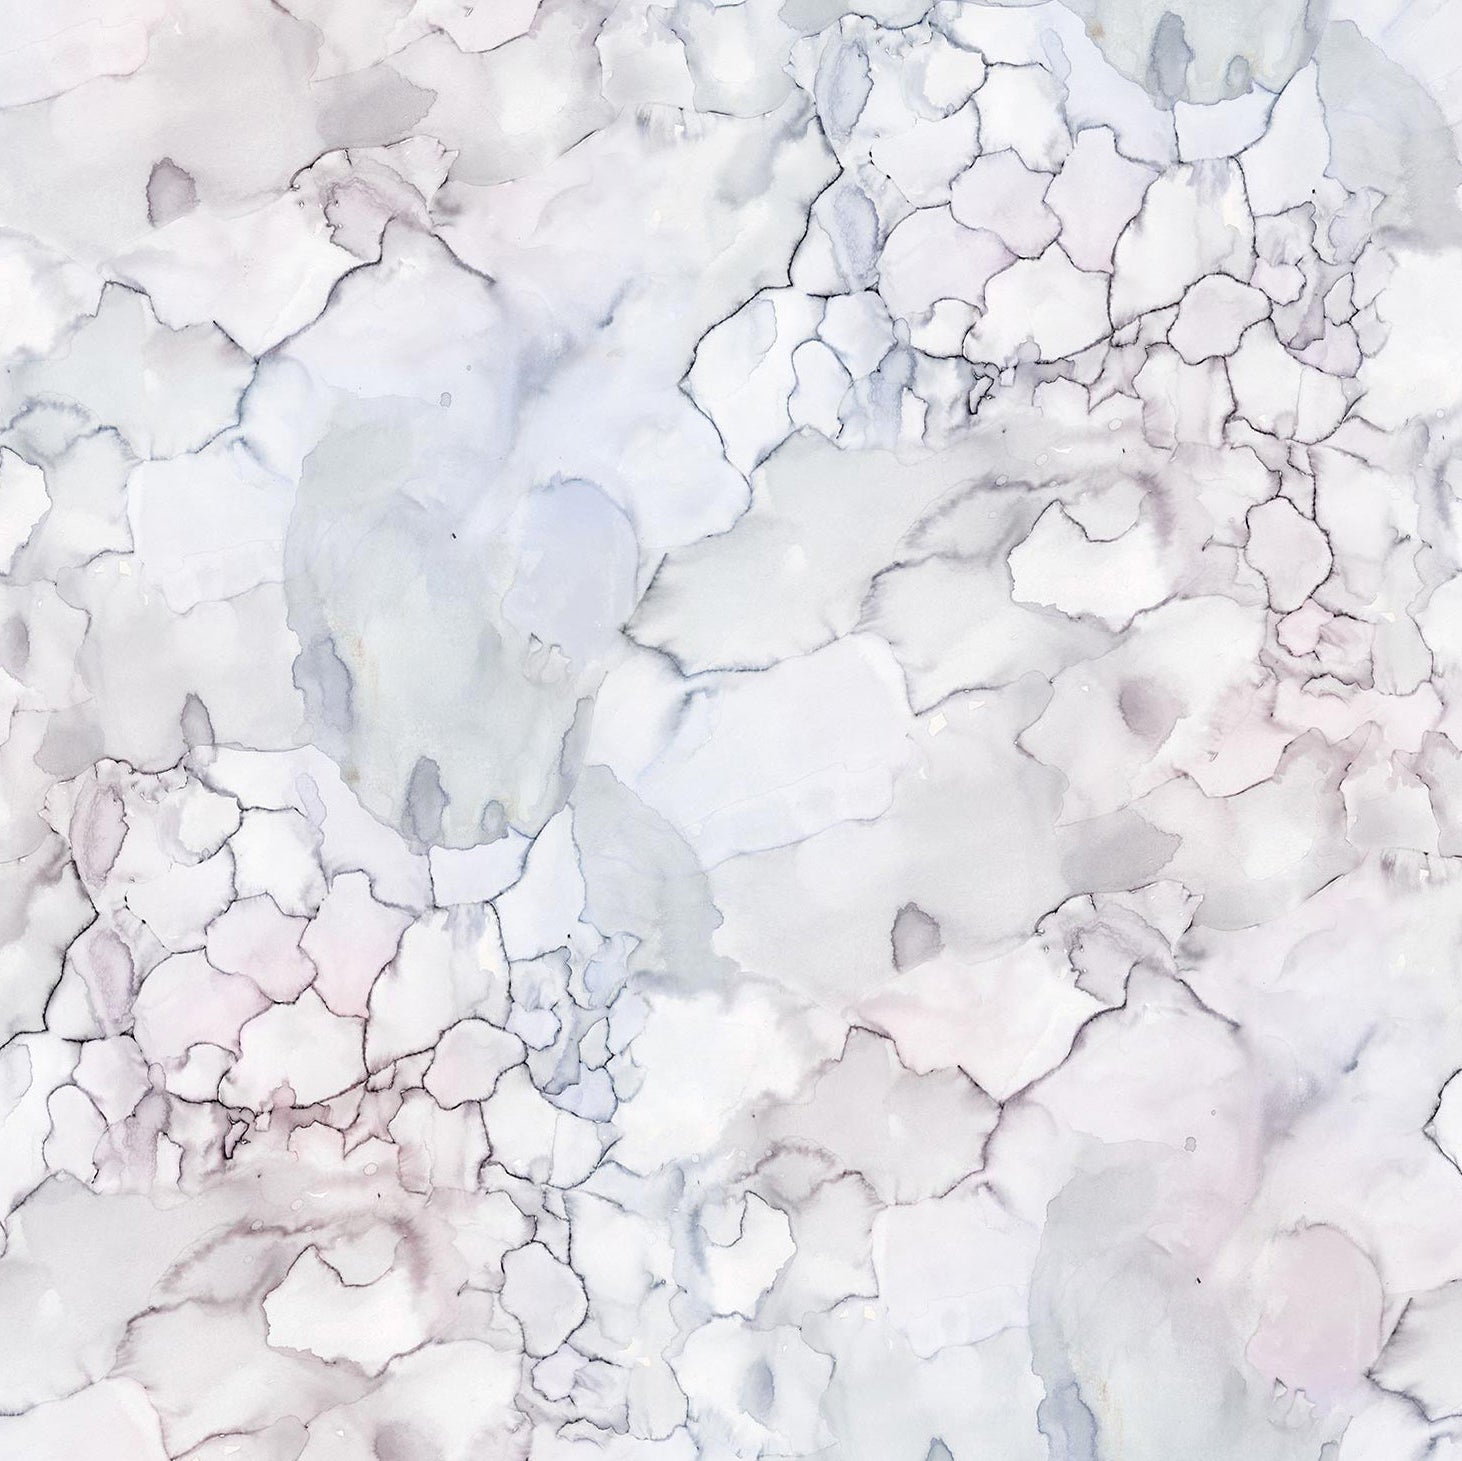 Detail of wallpaper in an abstract textural print in shades of white, purple and gray.